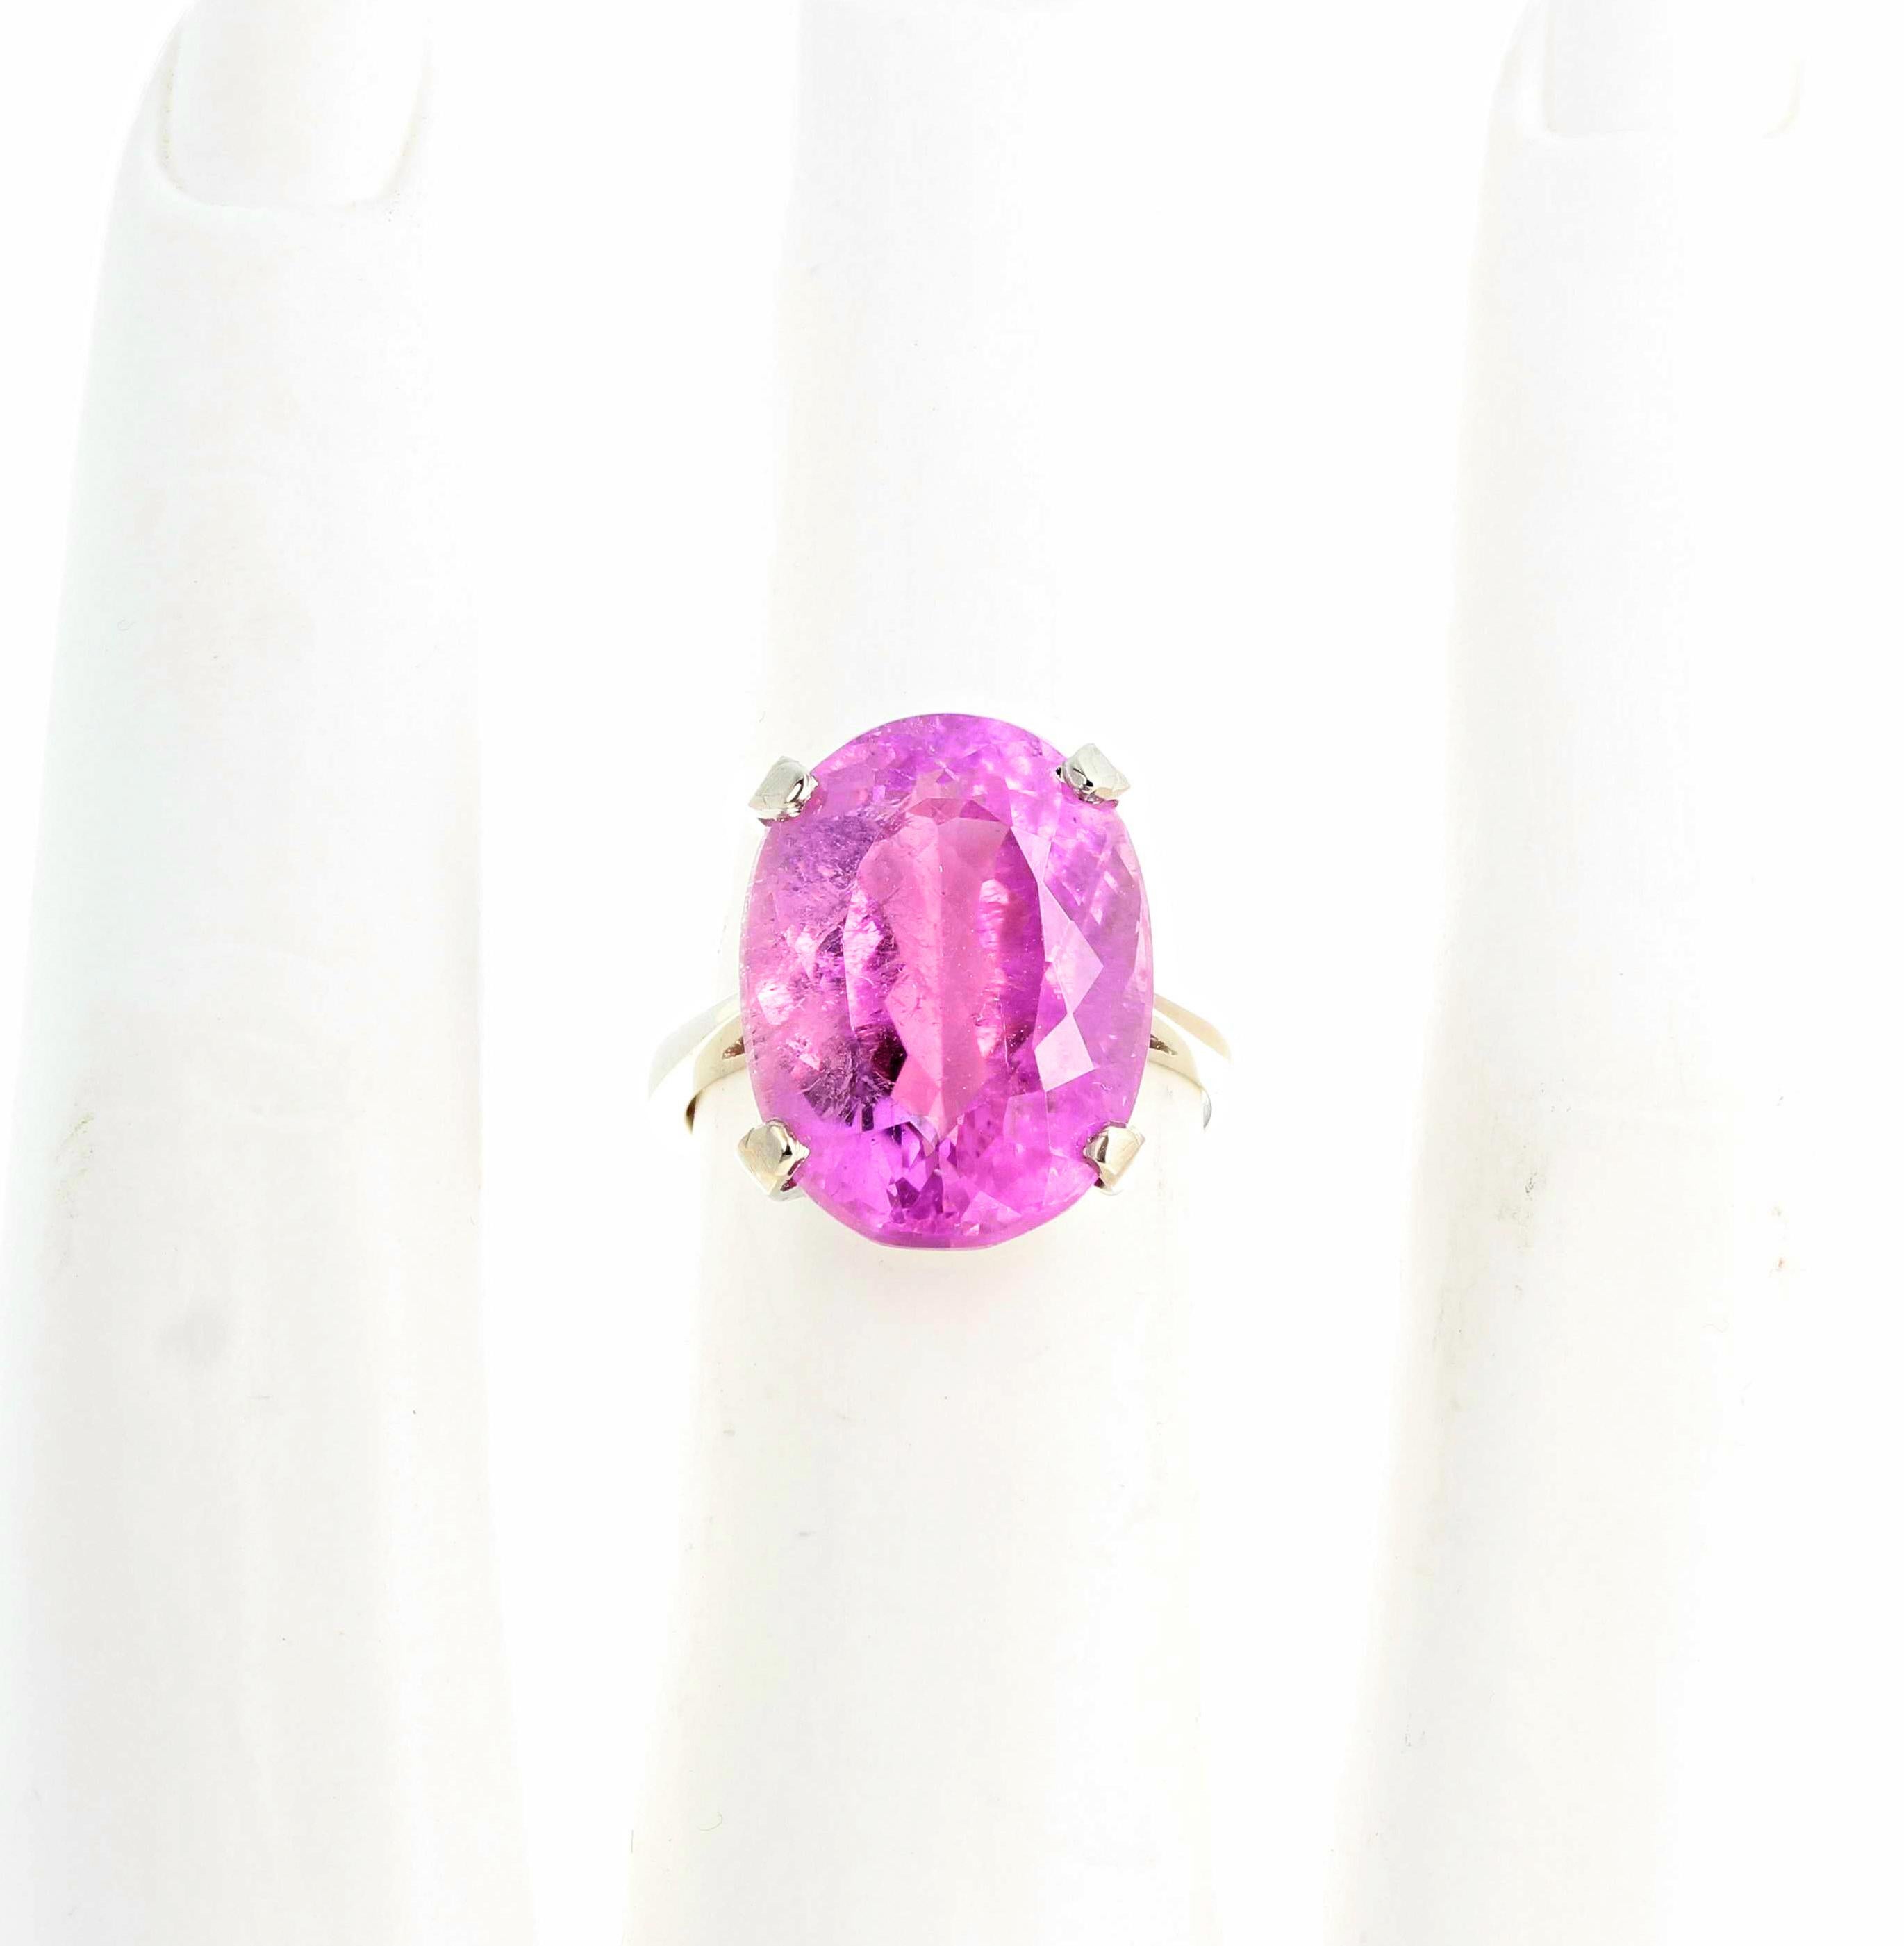 Oval Cut AJD Extraordinarily Rare Clear 14.16Ct PinkyPurple Sparkling Kunzite Silver Ring For Sale